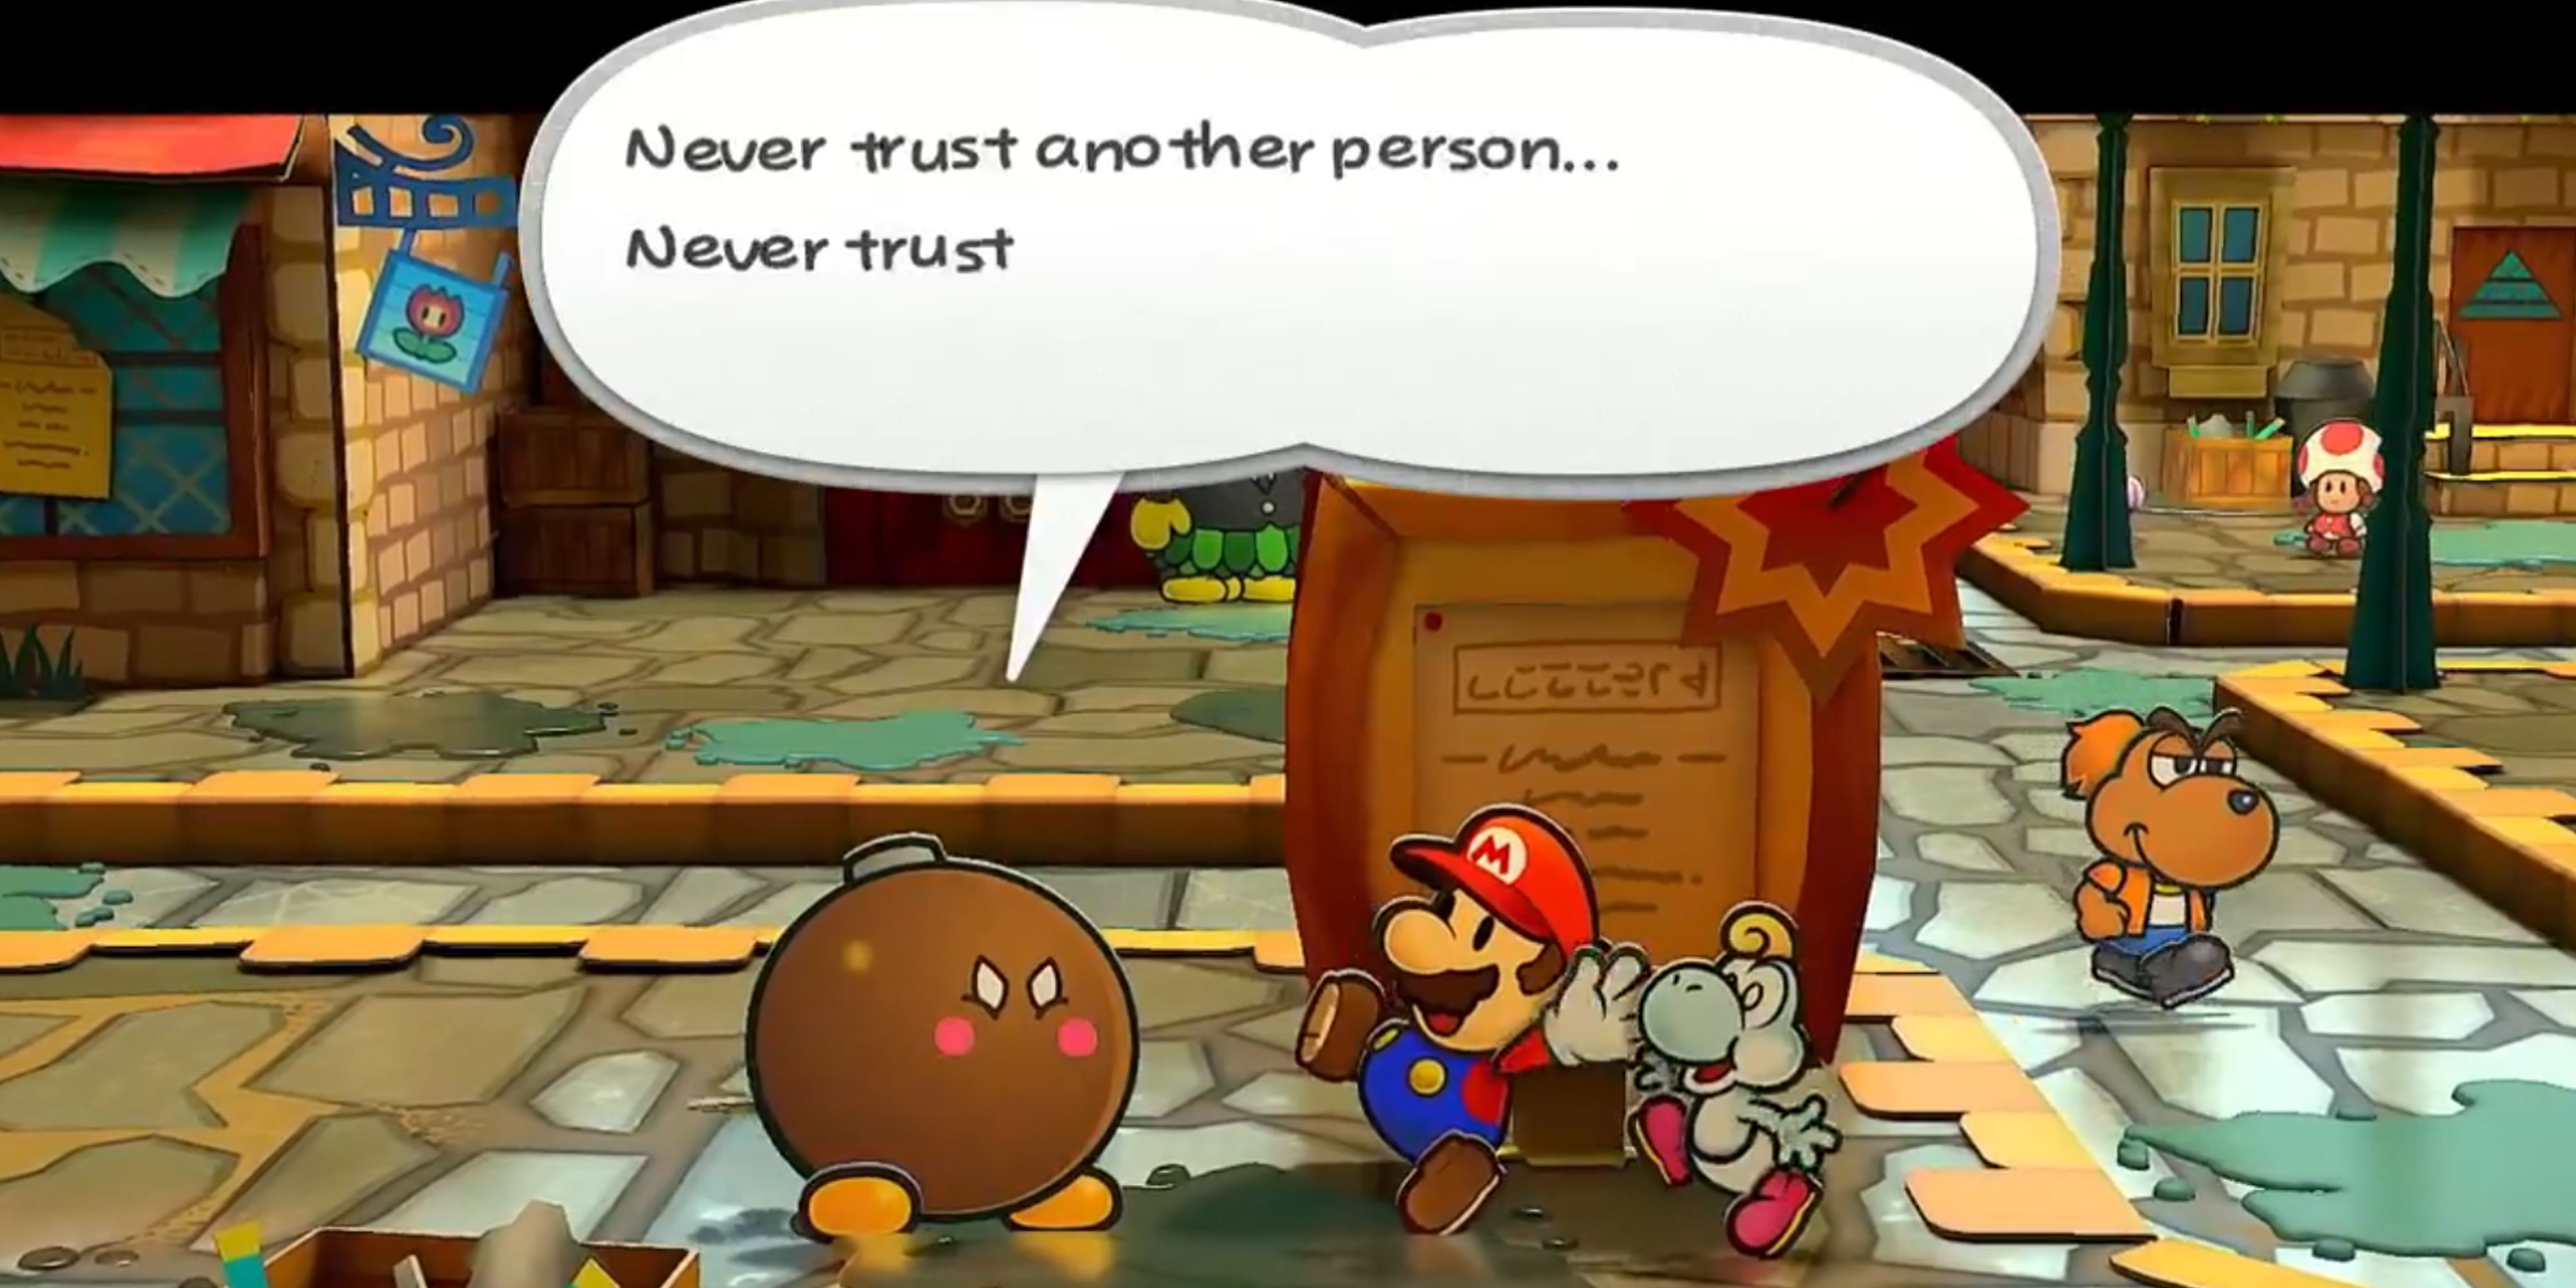 Paper Mario The Thousand Year Door Nintendo Switch remake bob-omb blowing up as it says never trust another person while Mario panics